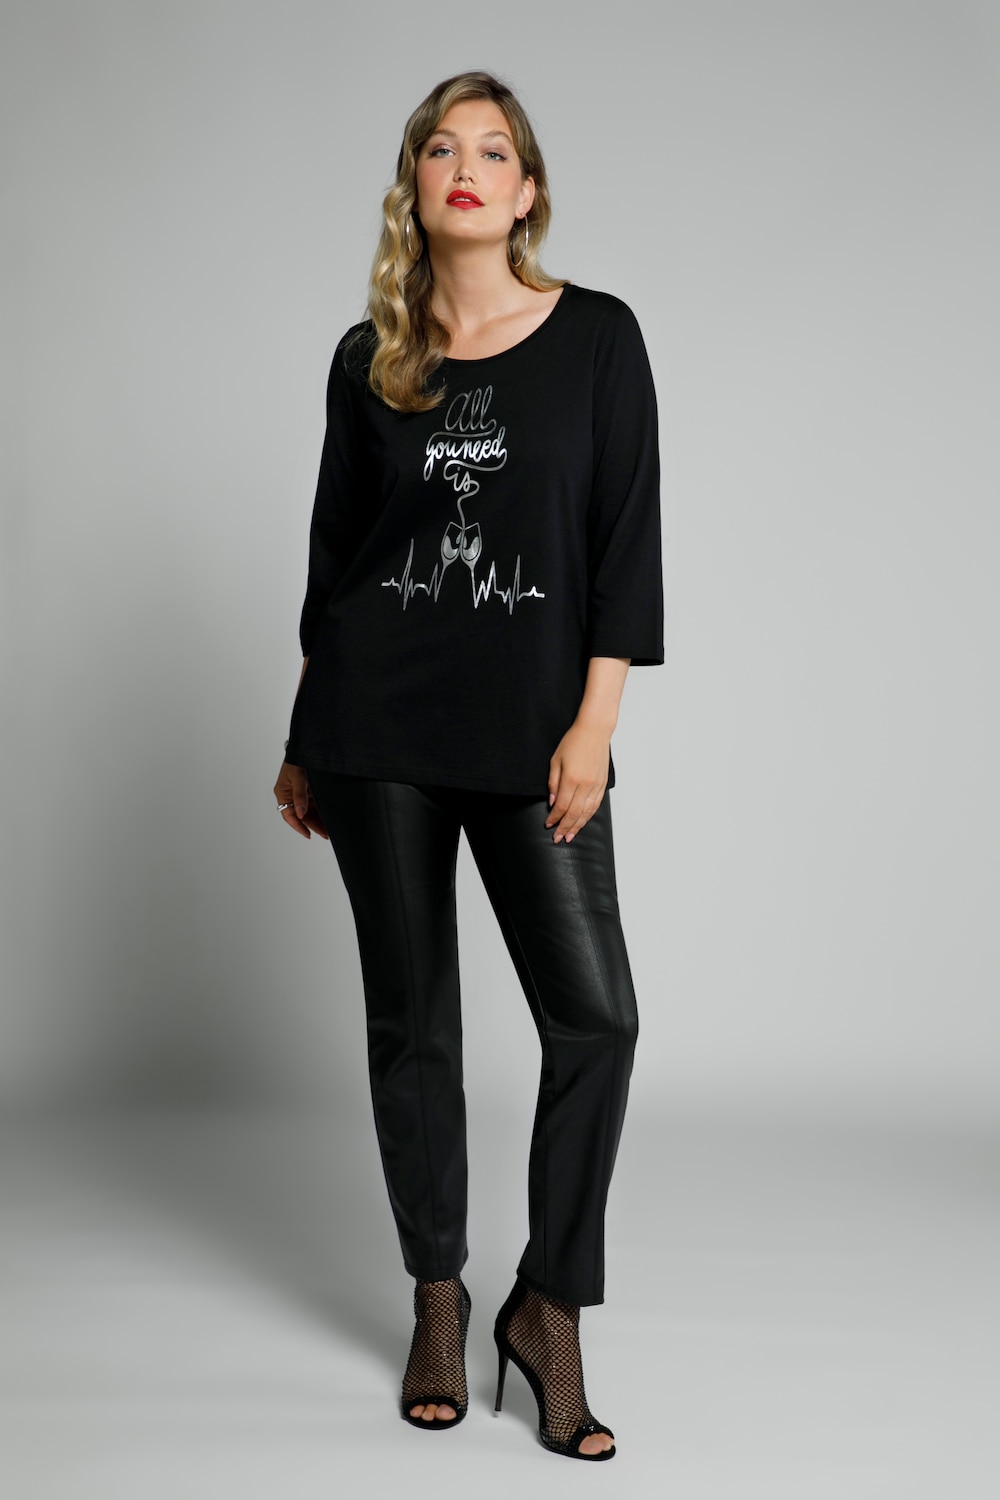 Plus Size ALL YOU NEED IS Wine Glass Round Neck Tee, Woman, black, size: 20/22, cotton, Ulla Popken